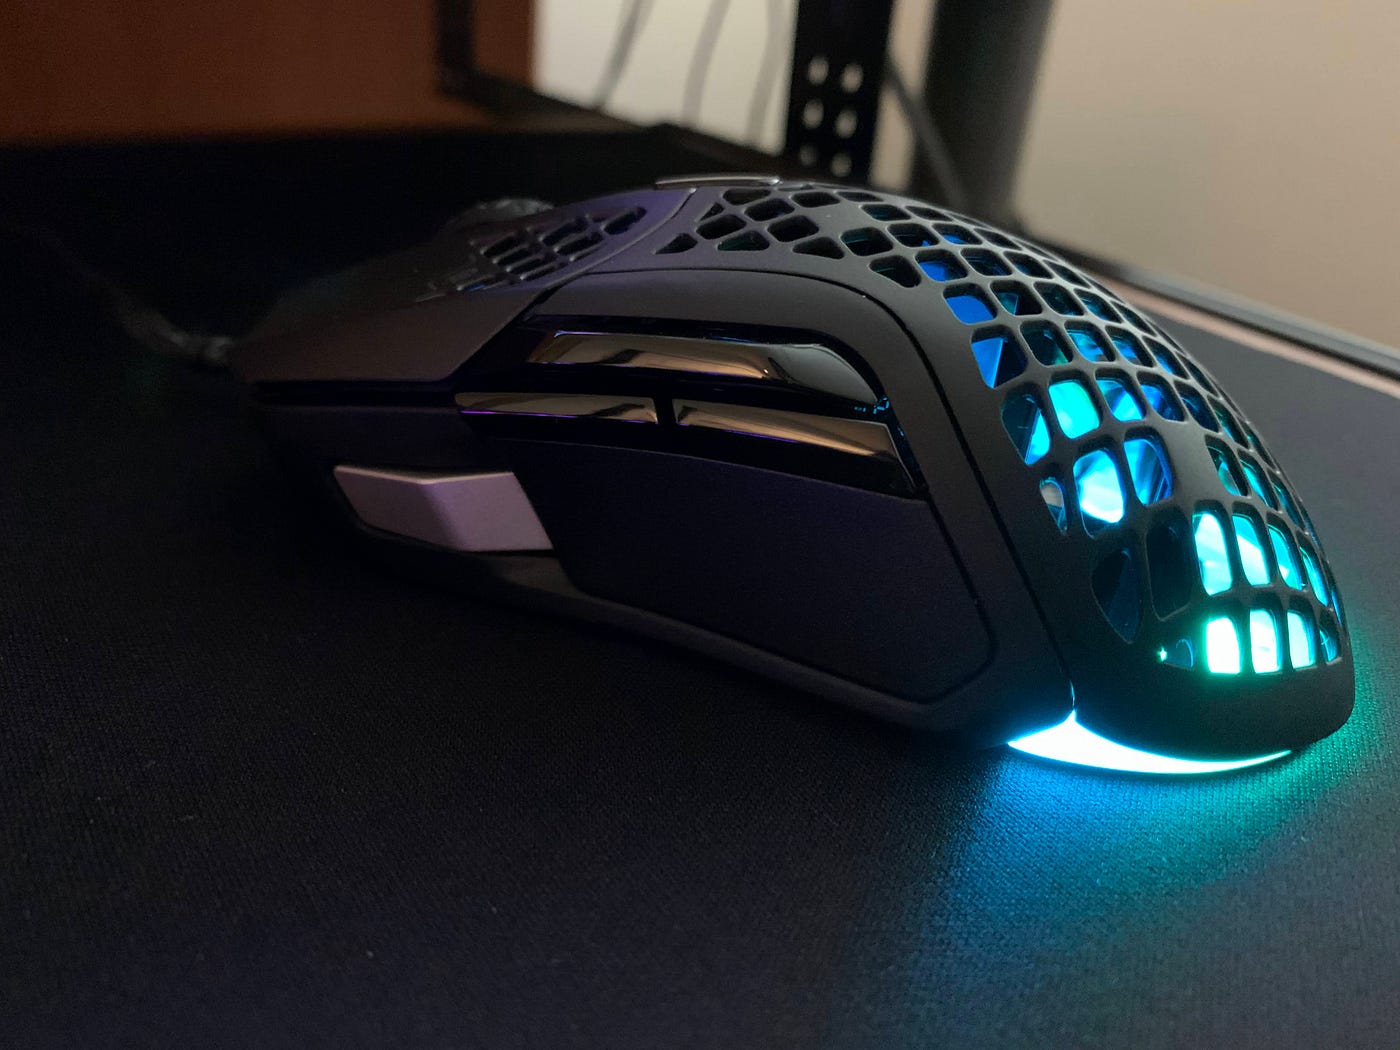 Steelseries Aerox 5 Wired and Wireless Gaming Mouse Review